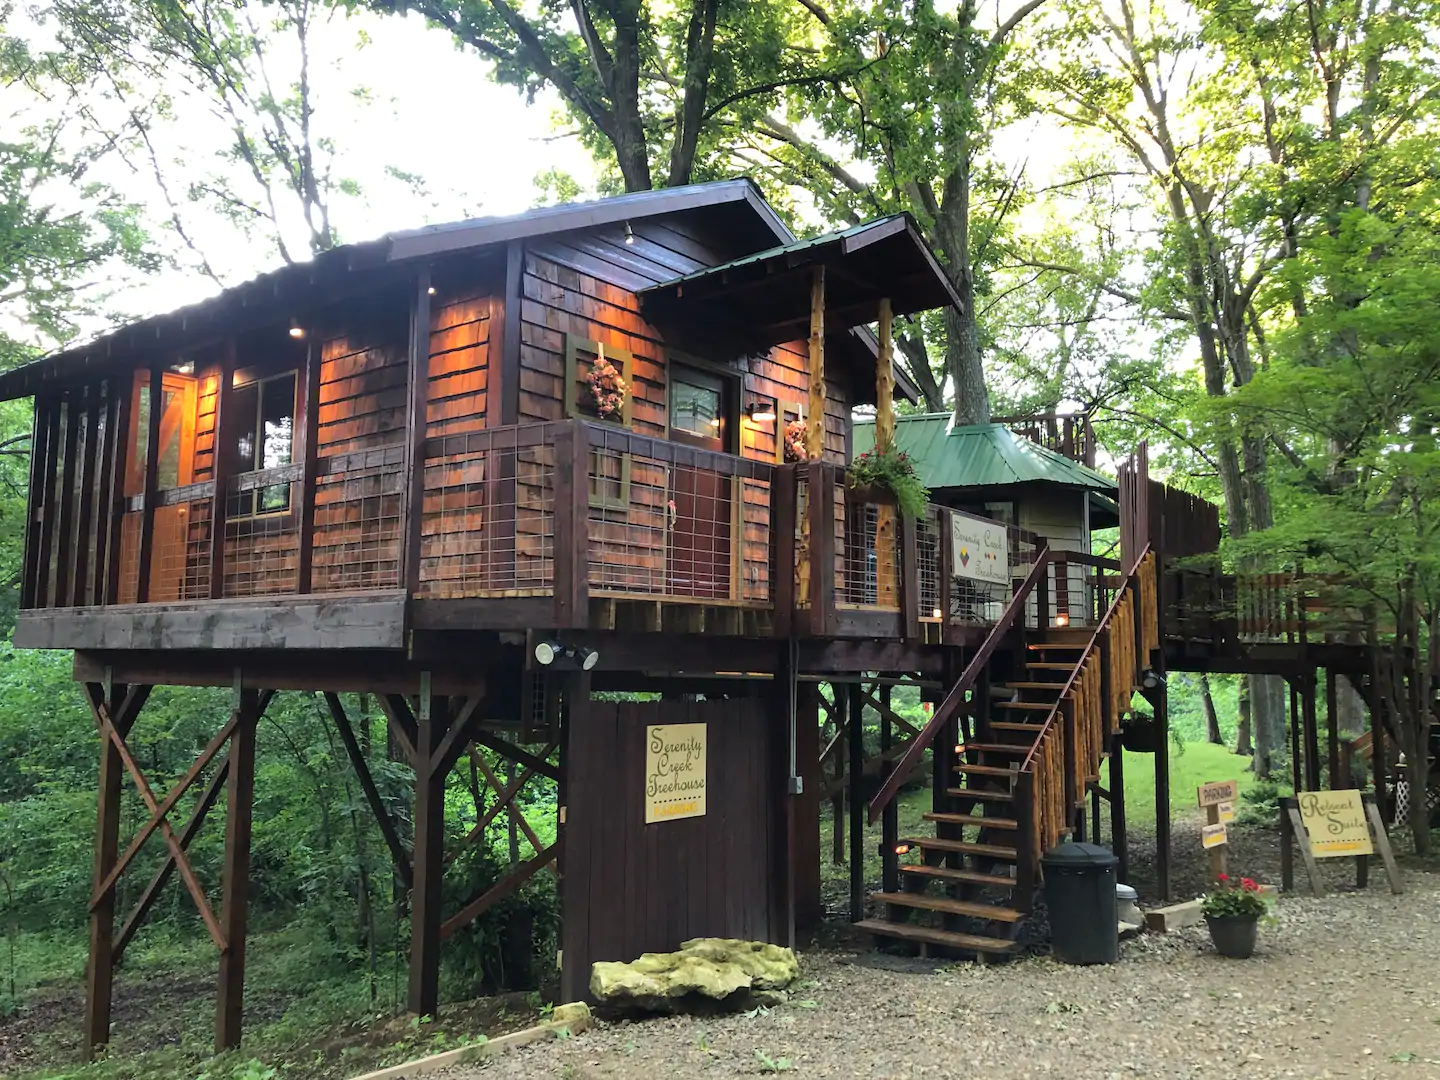 Serenity Creek Treehouse is one of the best Airbnbs in Kansas